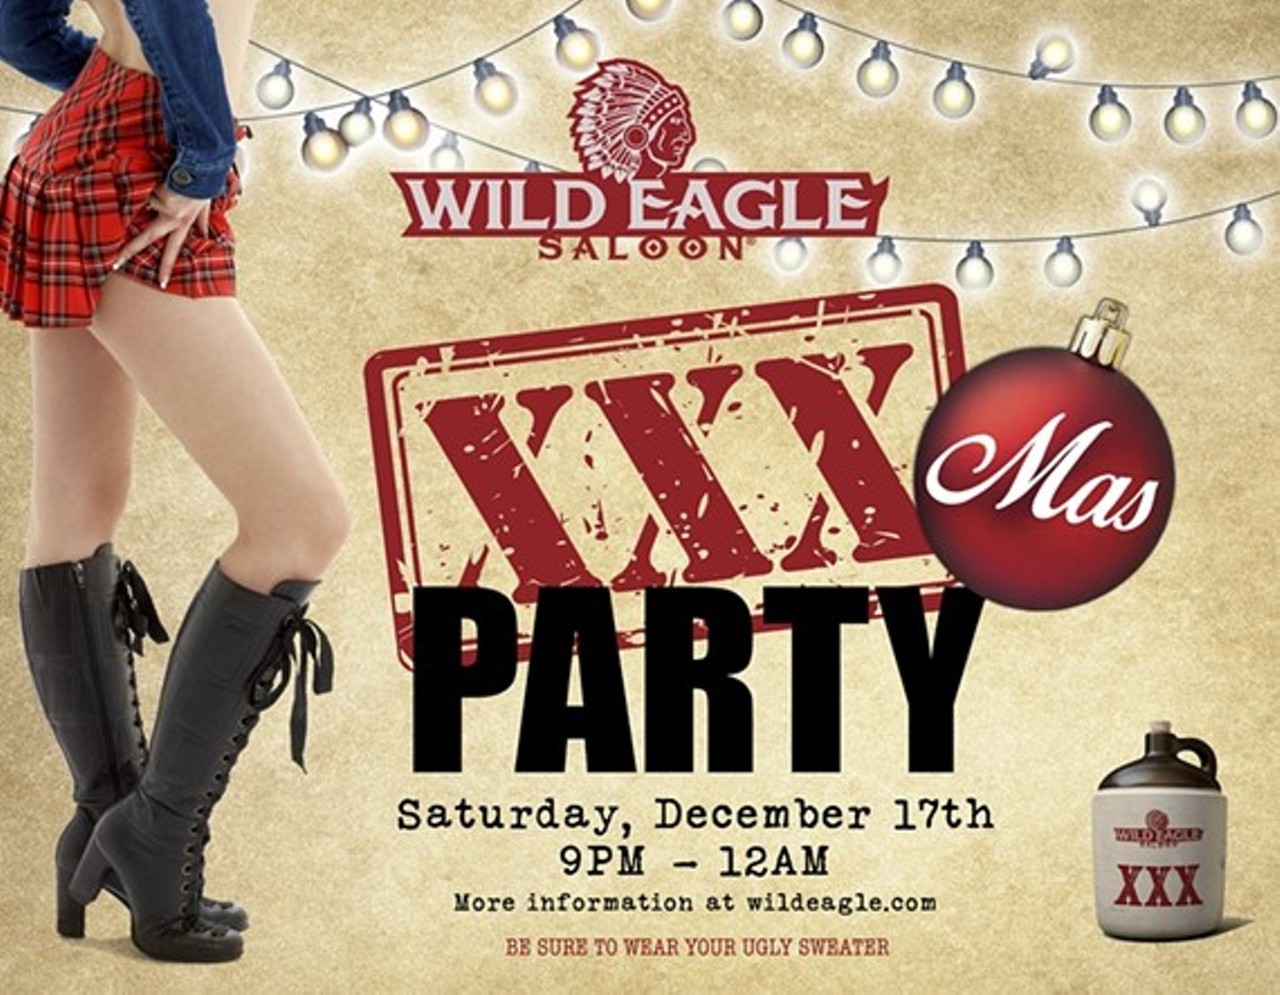 XXXMas Party at Wild Eagle Saloon - When: Sat., Dec. 17, 9 p.m.-12 a.m., free admission. For more information visit wildeagle.com